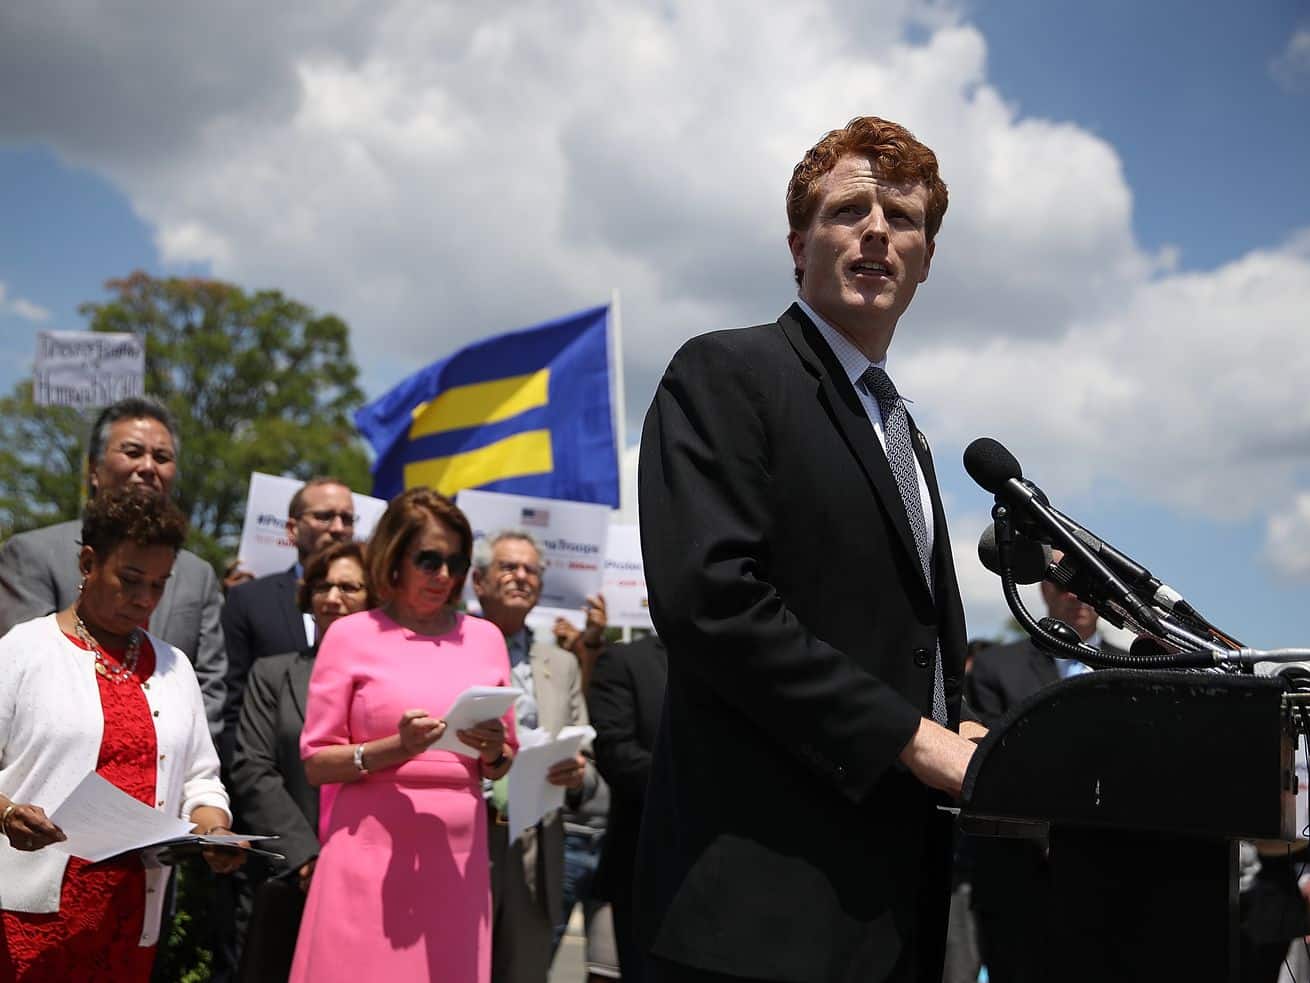 Democratic donor Laurene Powell Jobs is expanding her political operation with Joe Kennedy